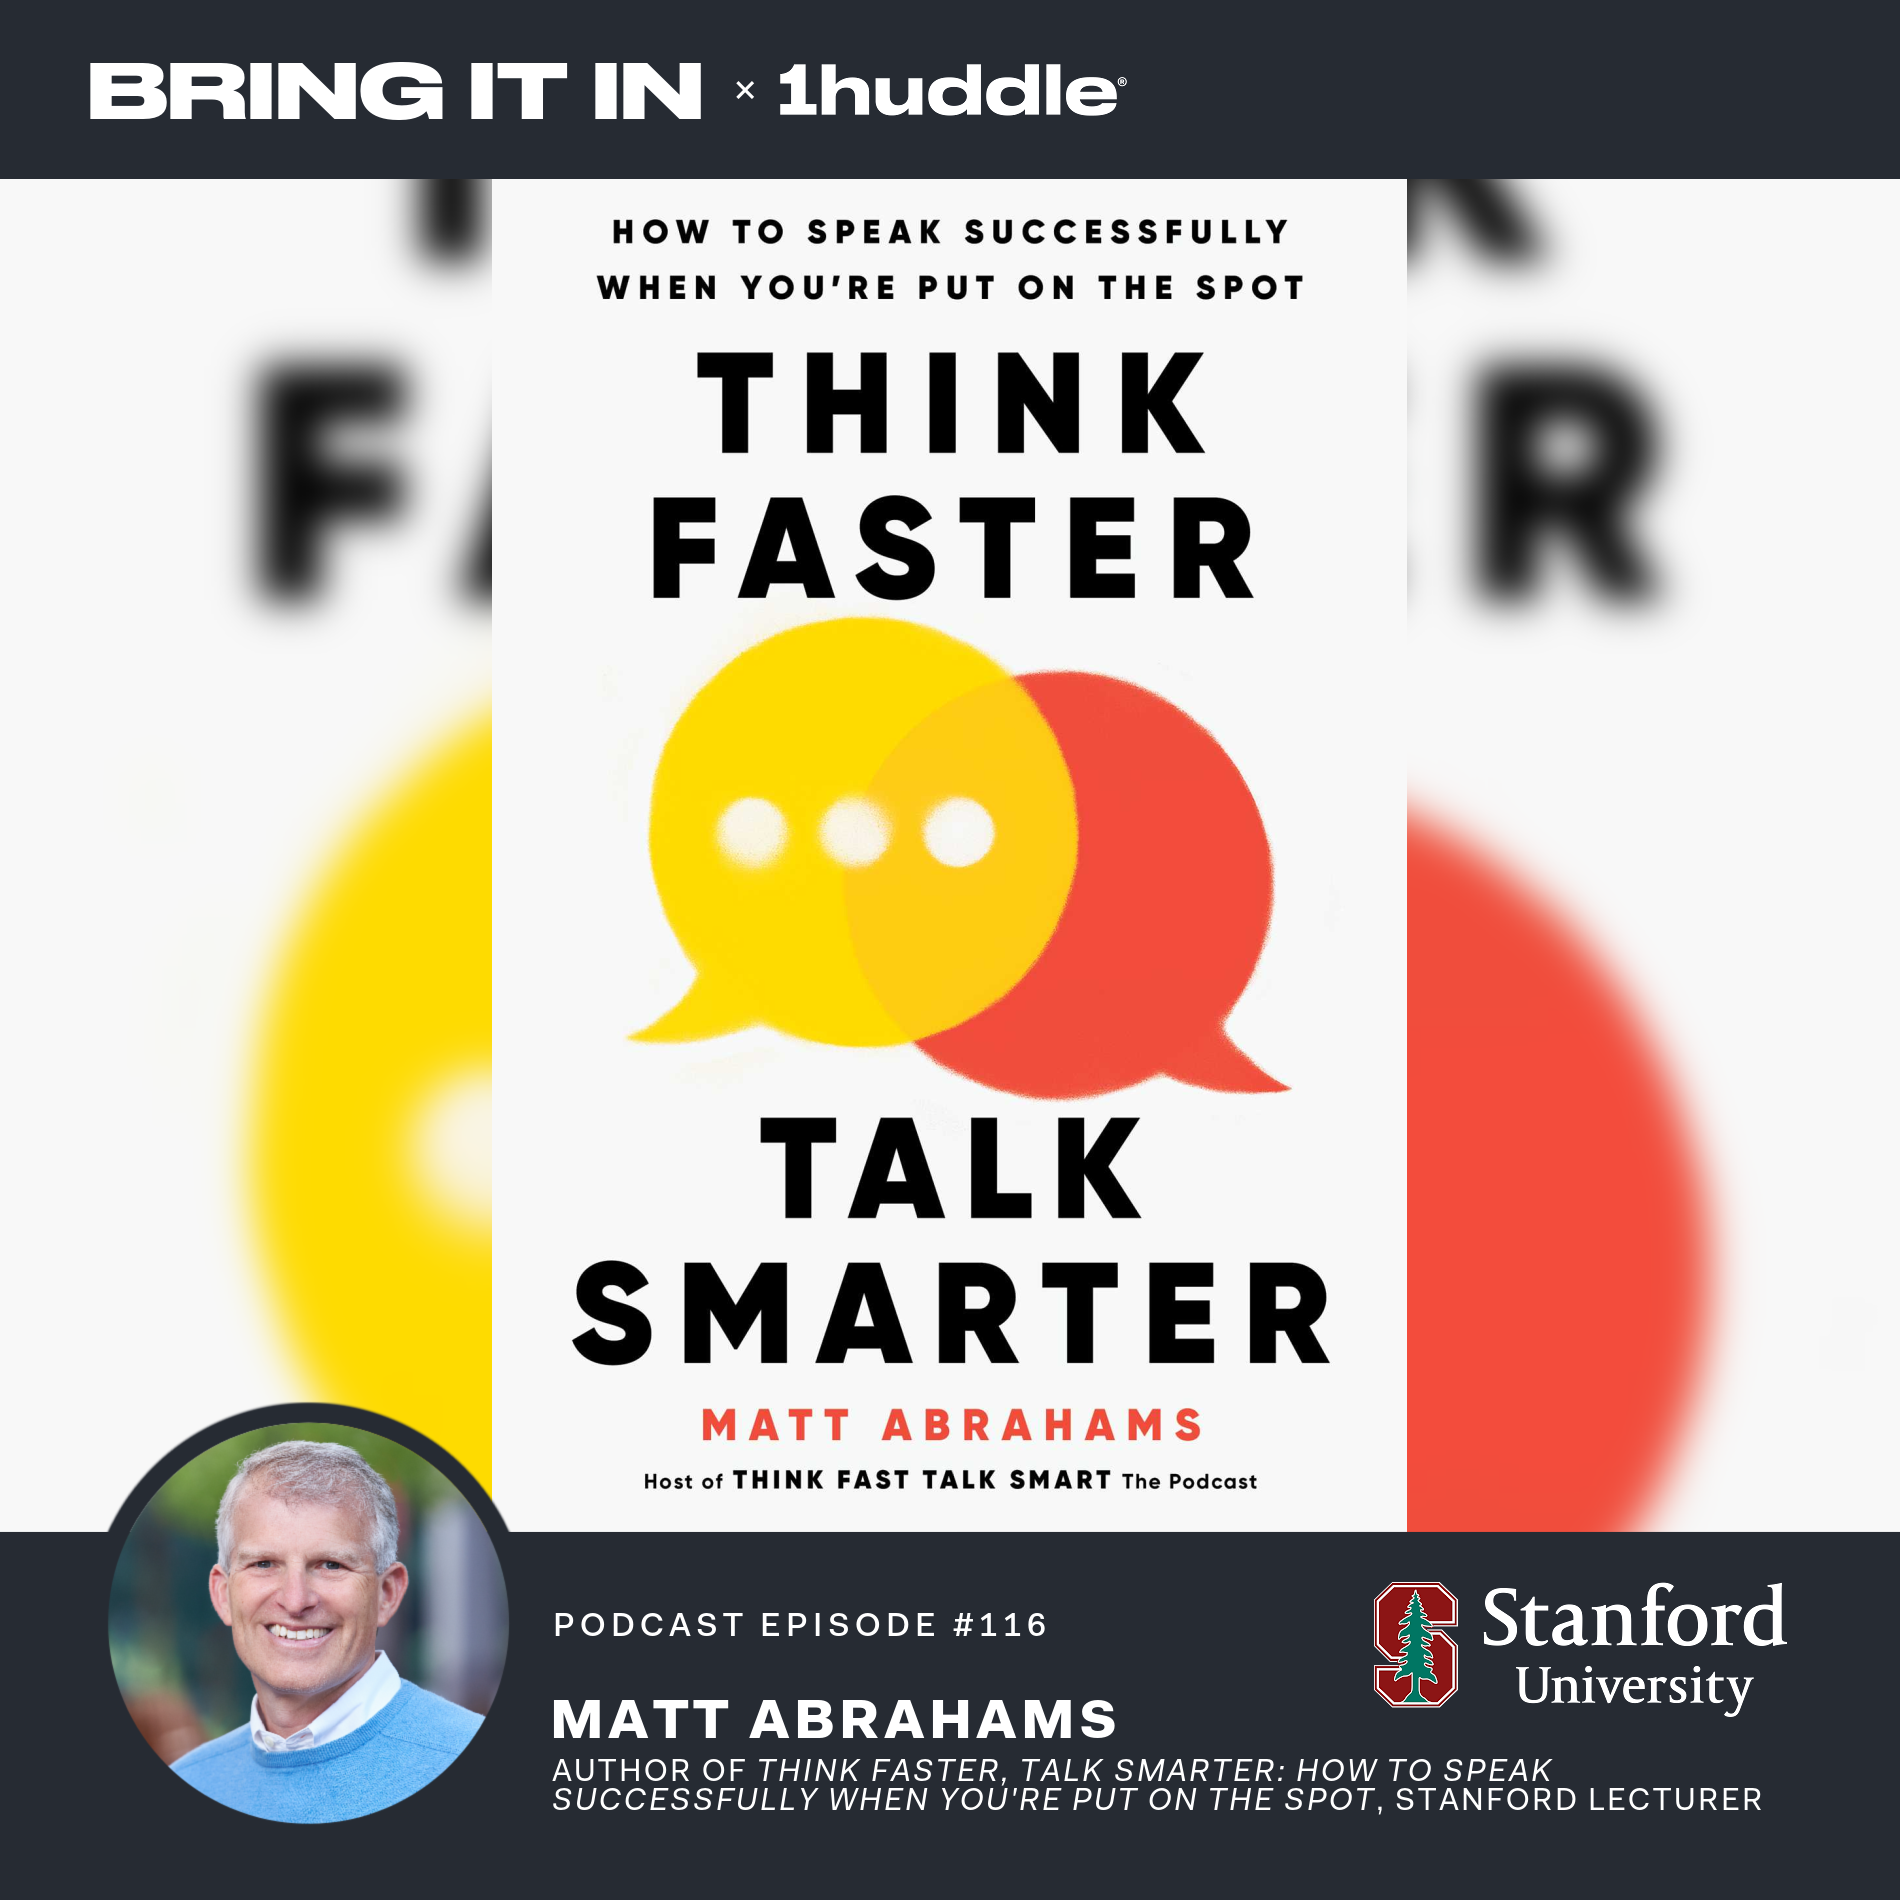 Think Faster Talk Smarter Author Podcast